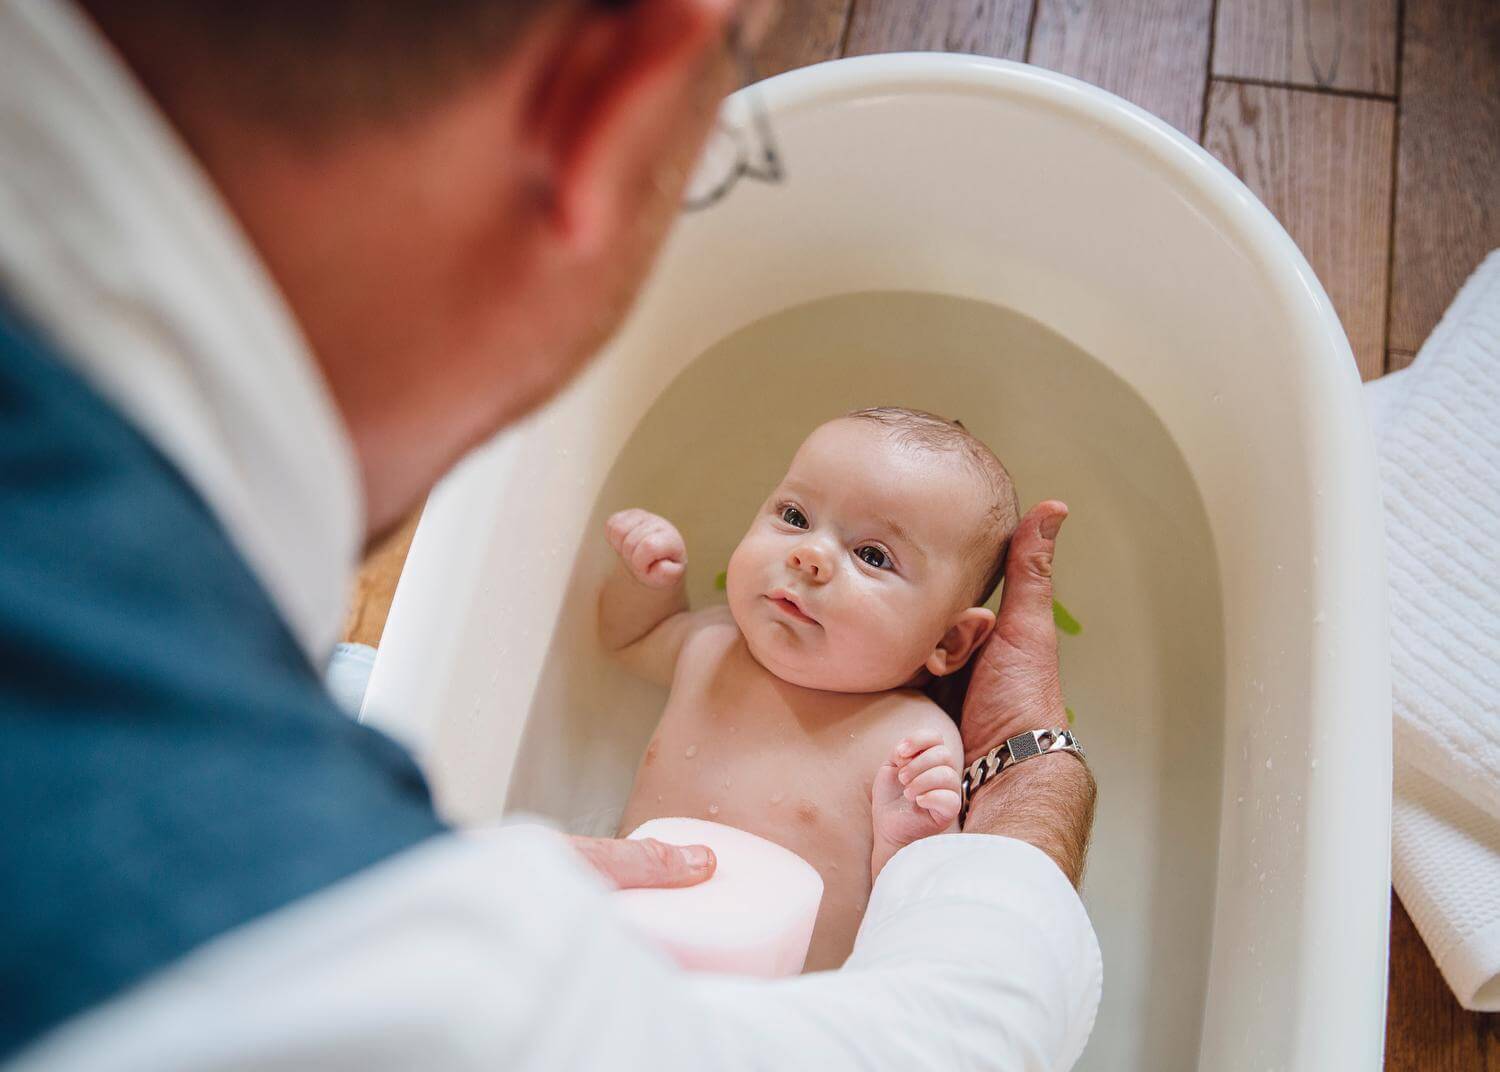 Dad leans over baby, giving them a bath